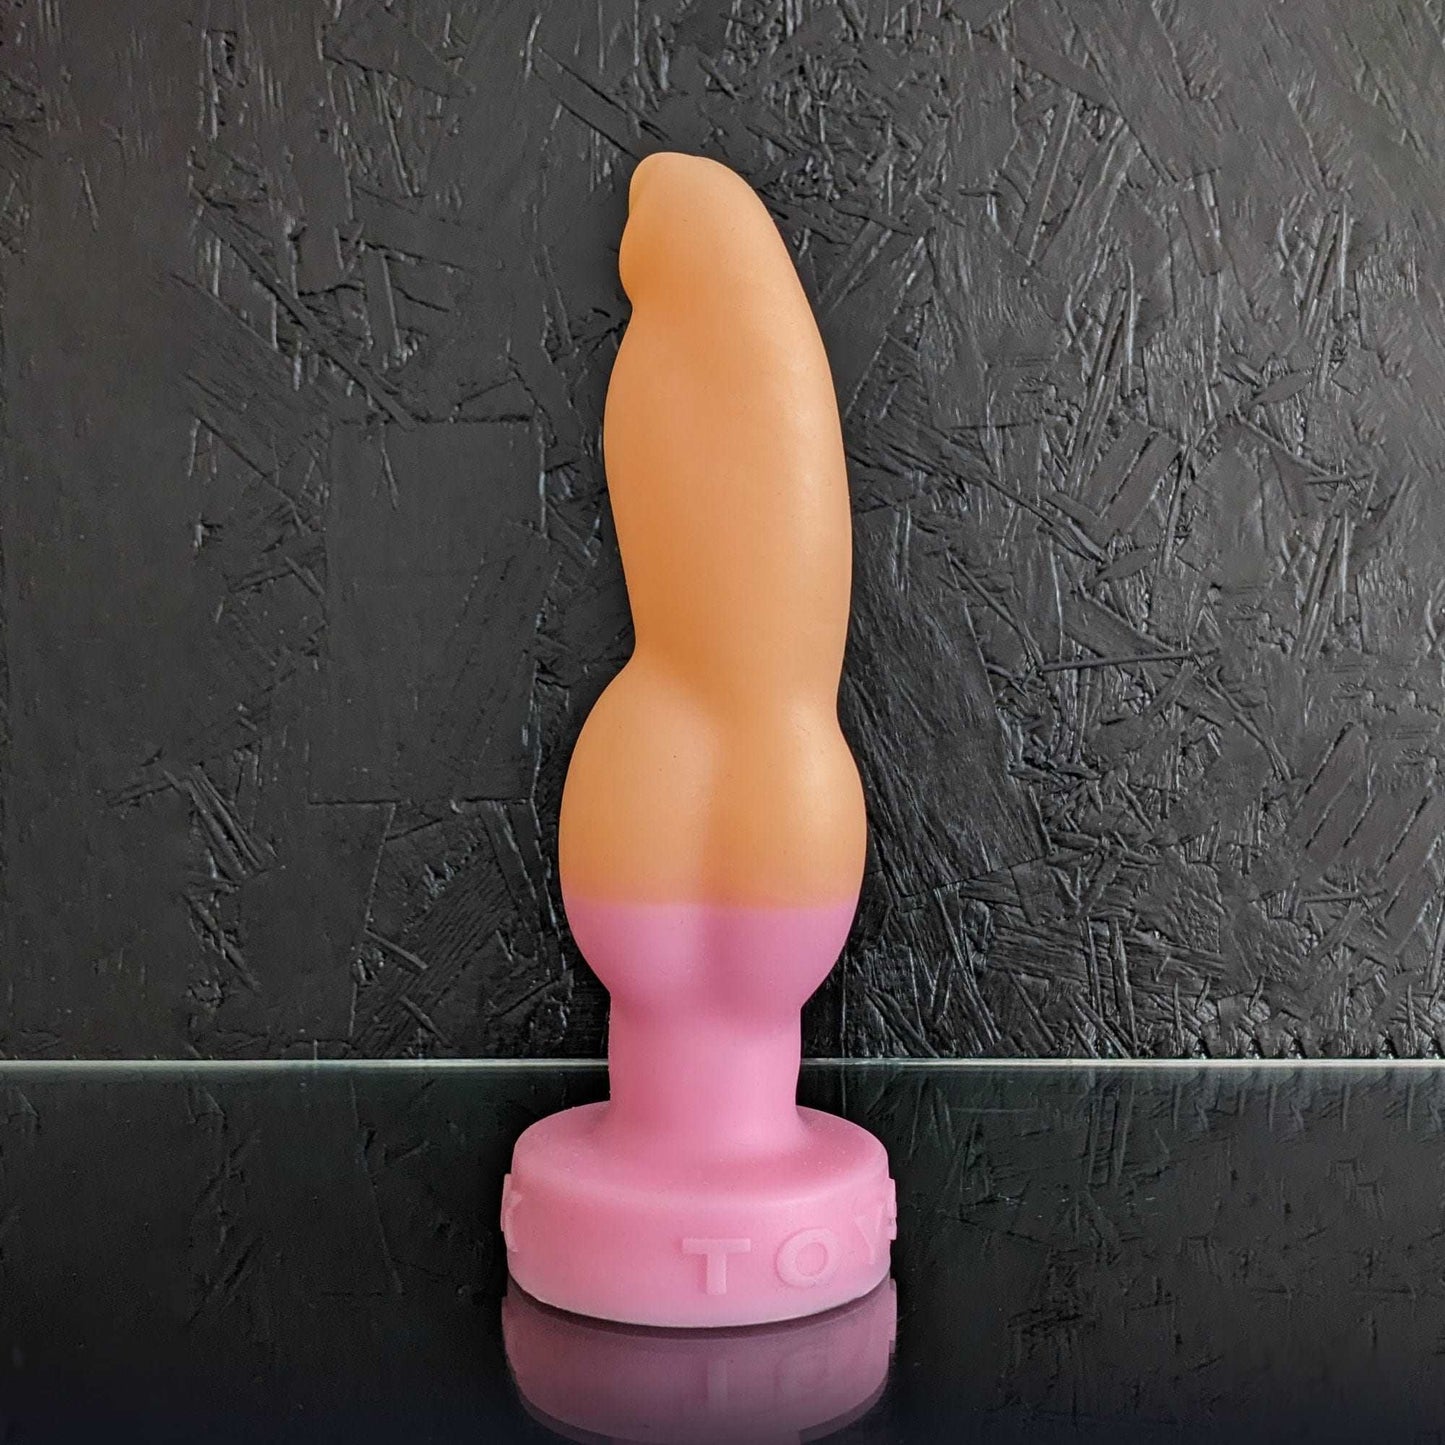 Reduced - Knot Dildo | Flexible Dildo | Handmade gift | knotted sex toy | Pegging Toy | Safe Silicone | Knox Pink-Orange | enjoyable insertion |